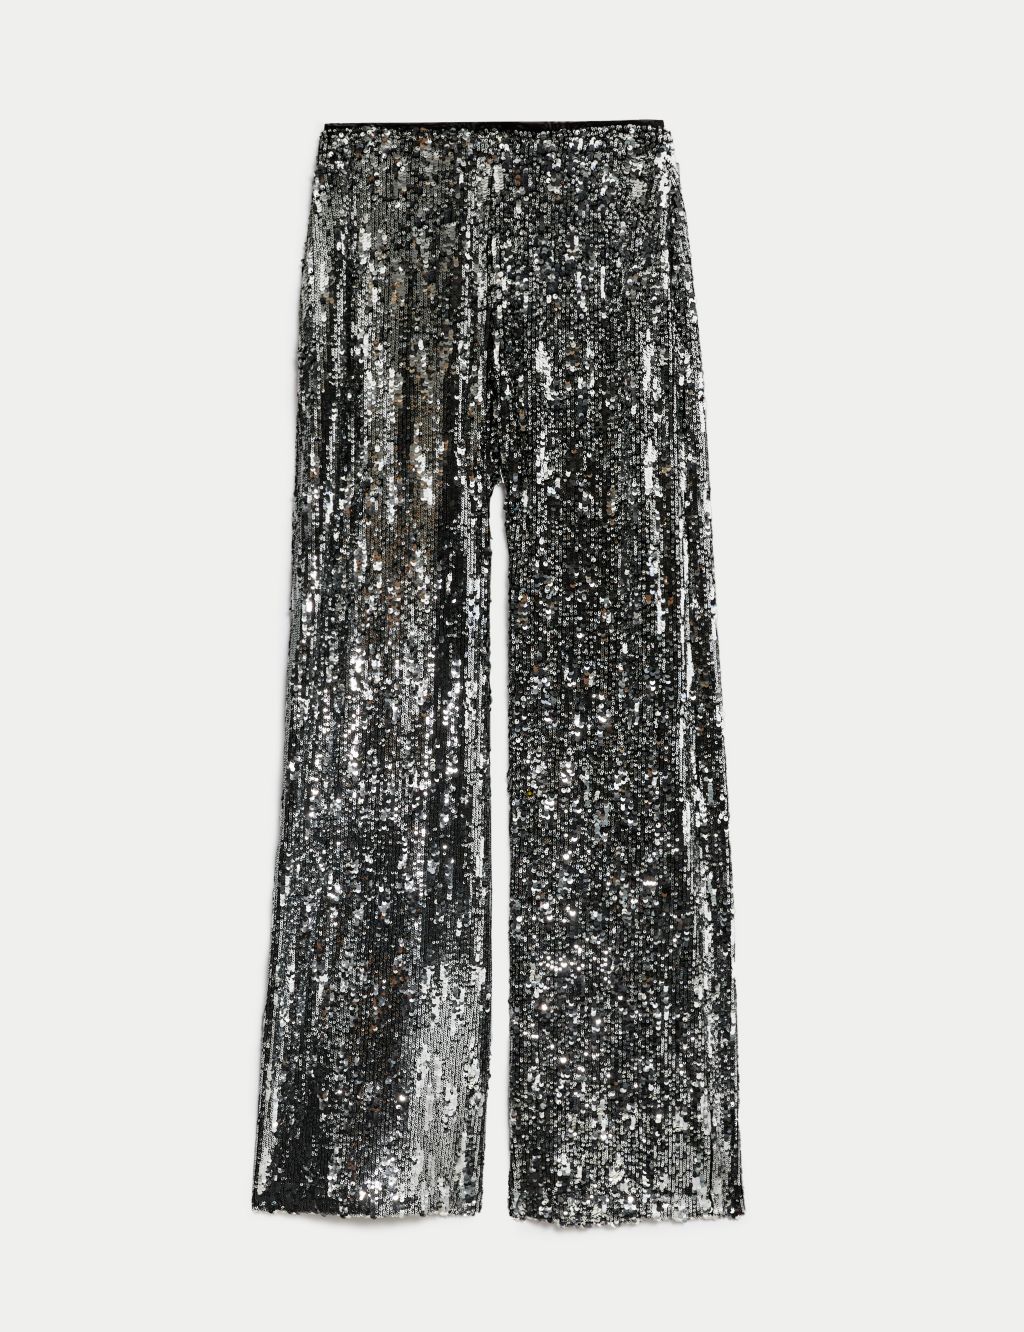 Sequin Elasticated Waist Wide Leg Trousers image 2